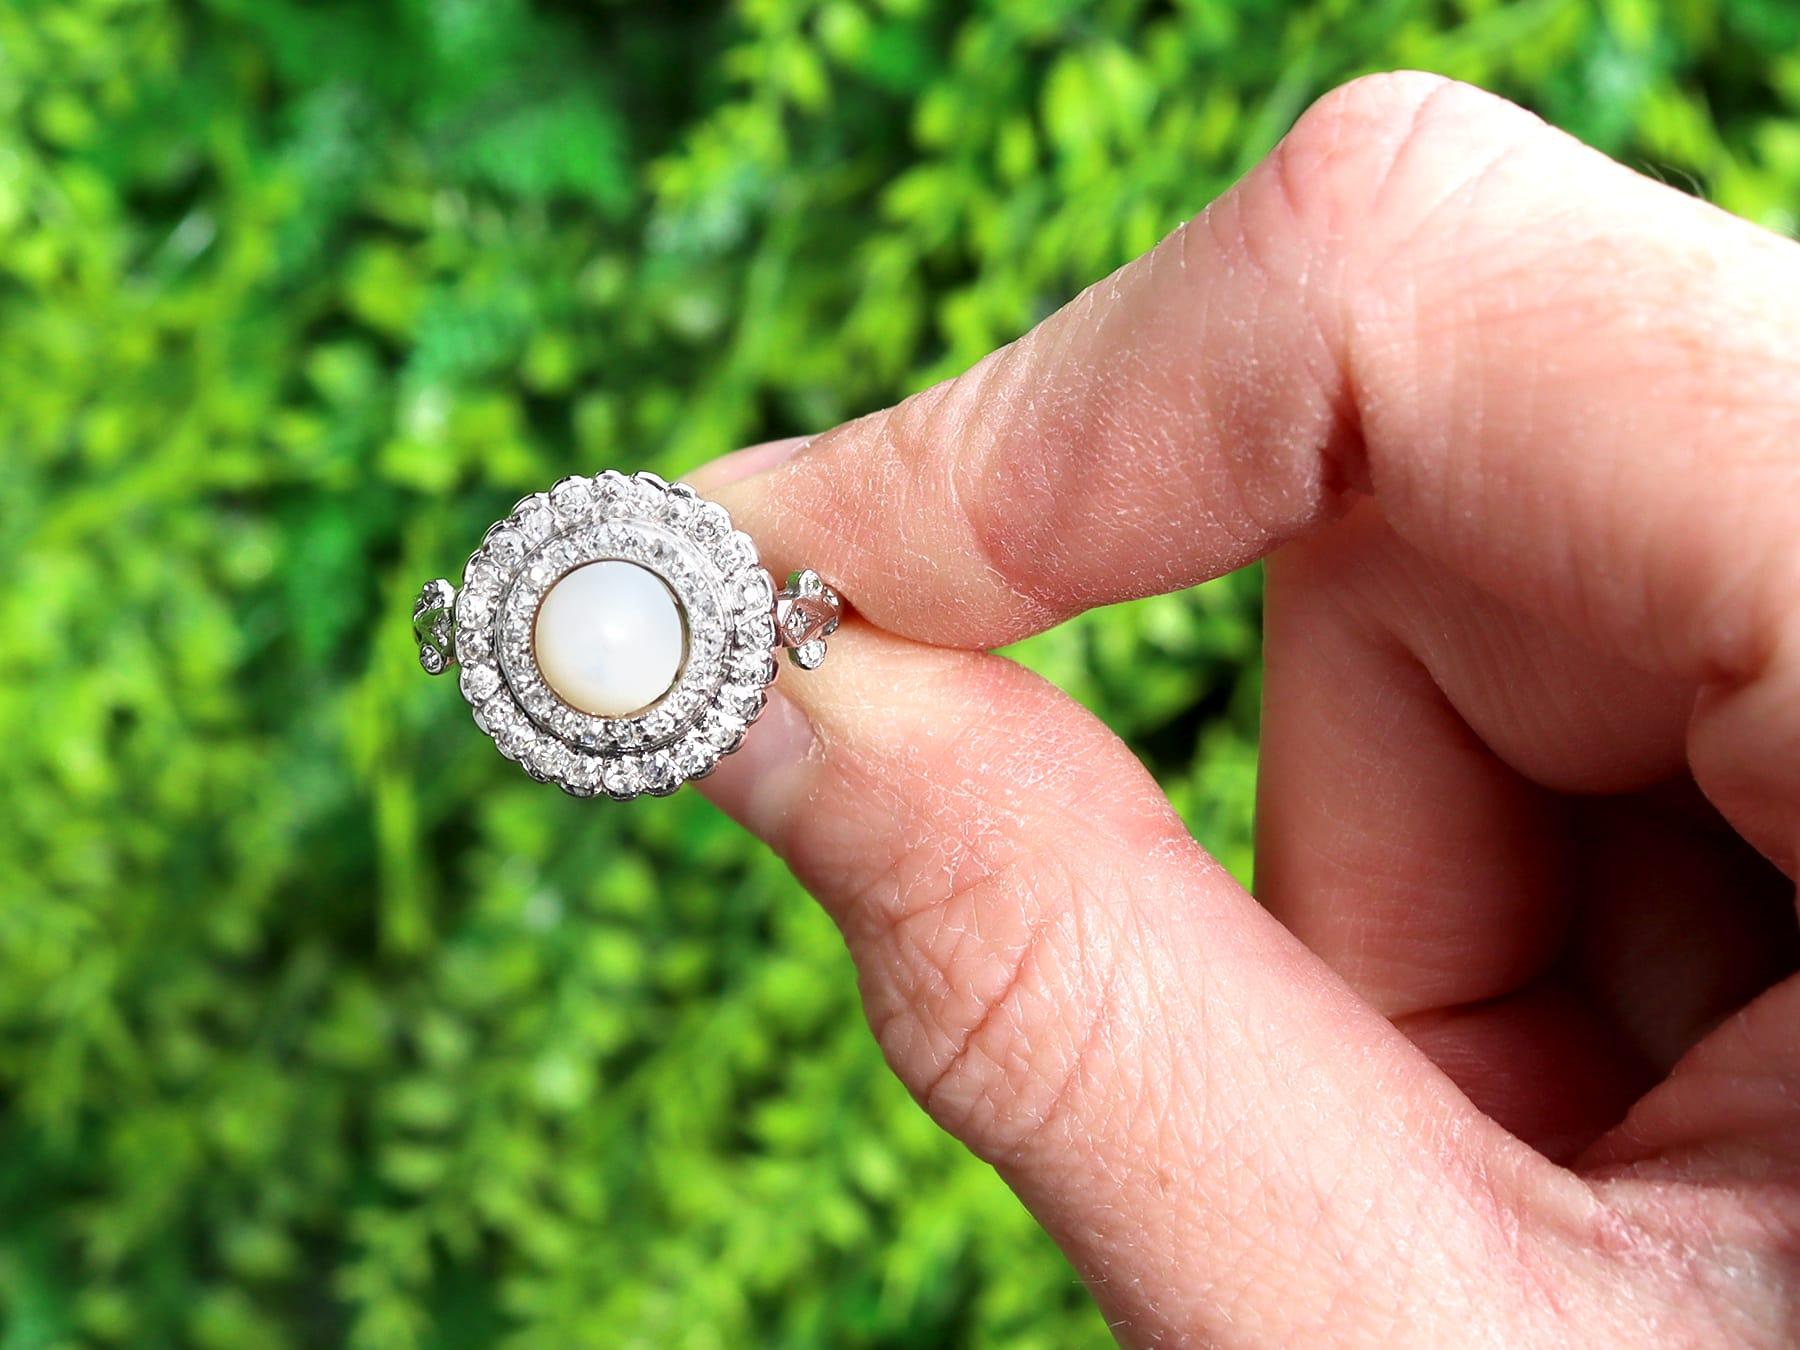 A fine and impressive antique 1910's pearl and 0.76 carat diamond, 18 karat white gold target ring; part of our diverse antique jewellery and estate jewelry collections.

This fine and impressive antique pearl ring has been crafted in 18k white